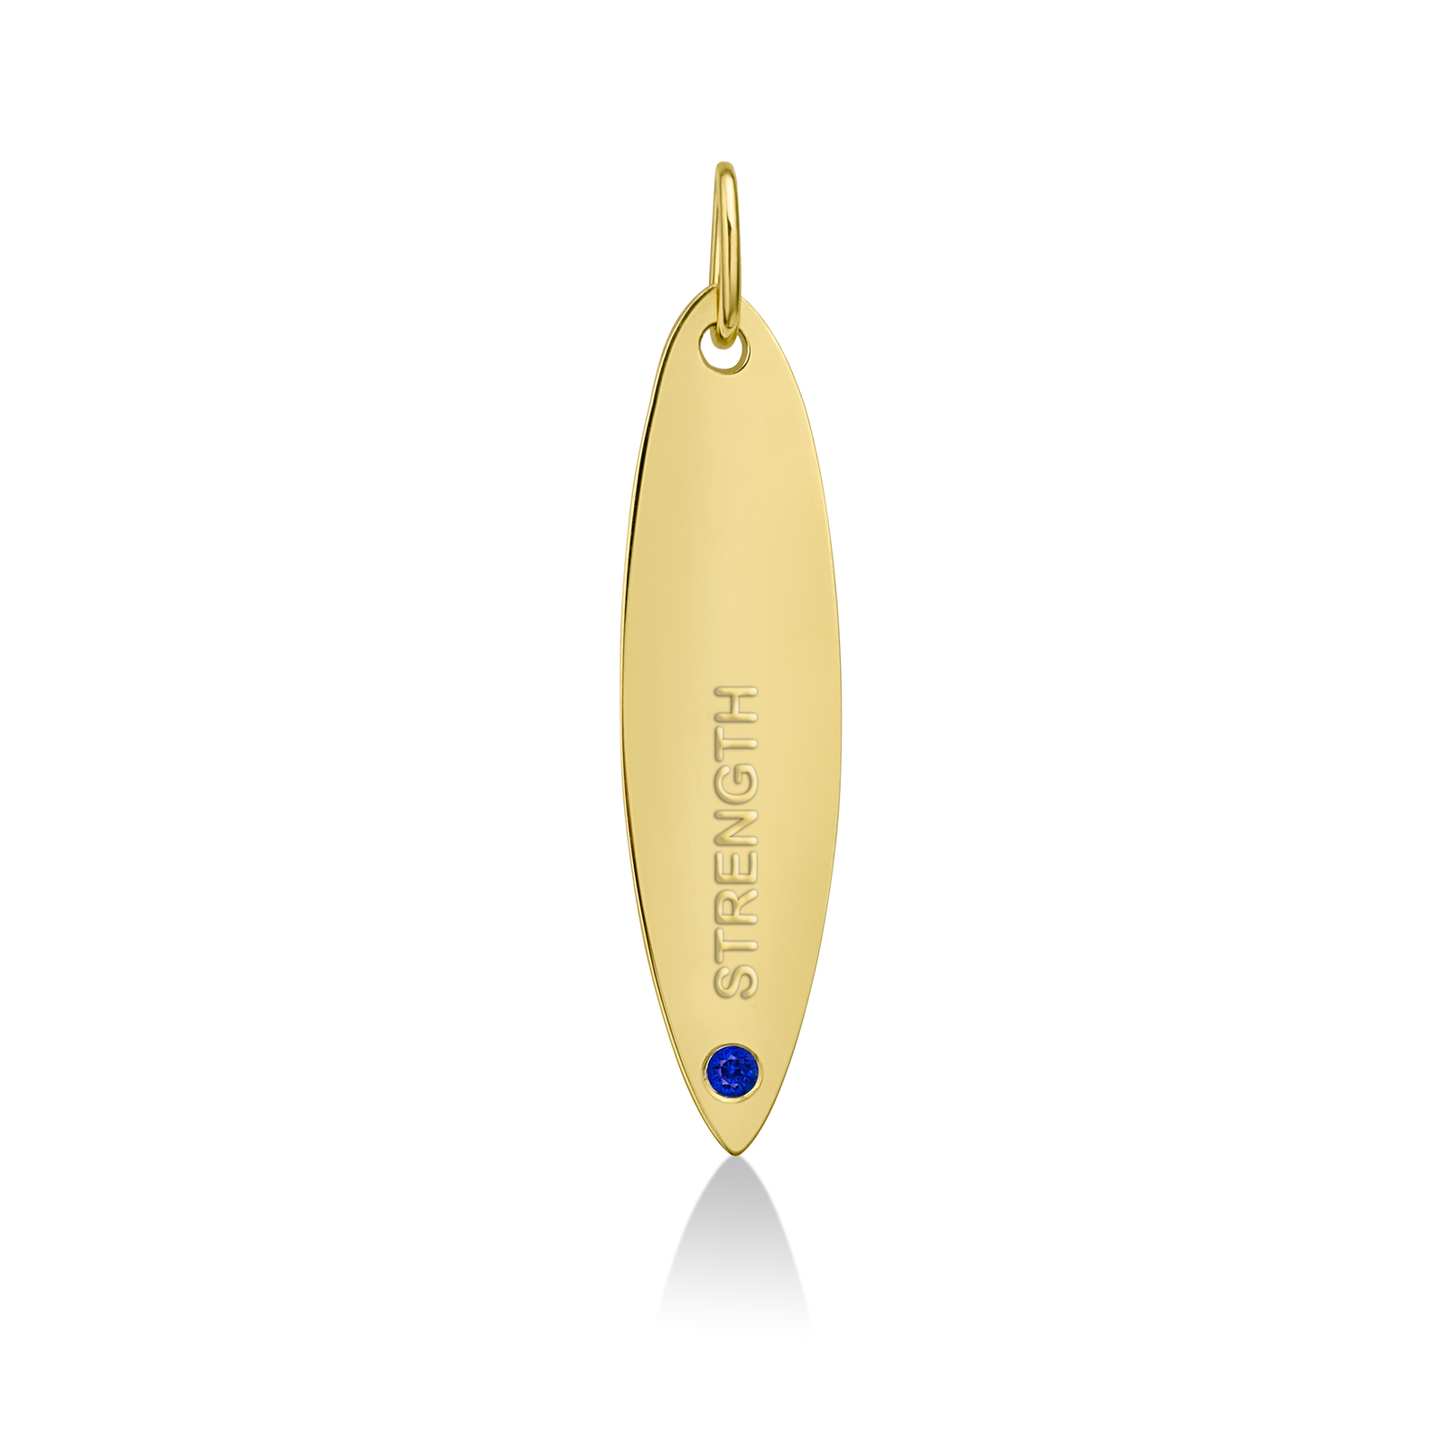 14k gold surfboard charm lock with STRENGTH engraved and sapphire